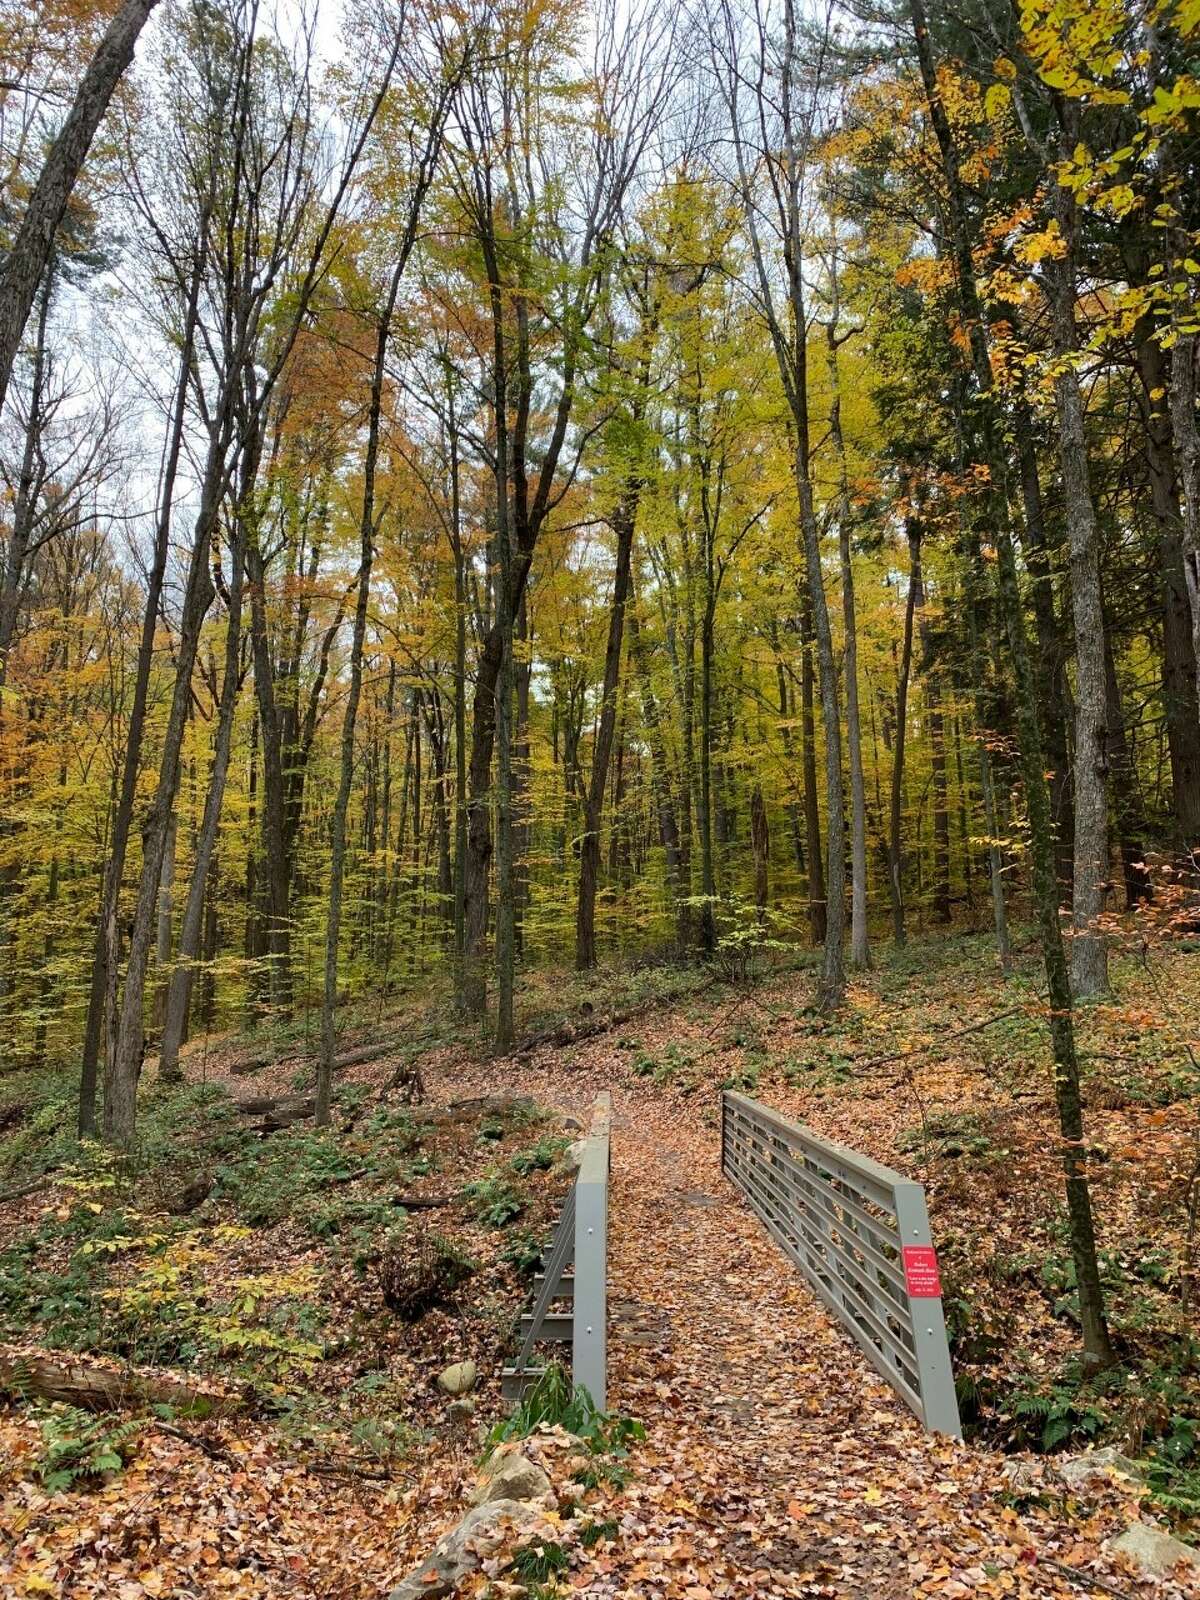 A grant from the Ice Mountain Environmental Stewardship Fund program will help fund continued construction of the Dragon Trail at Hardy Dam.